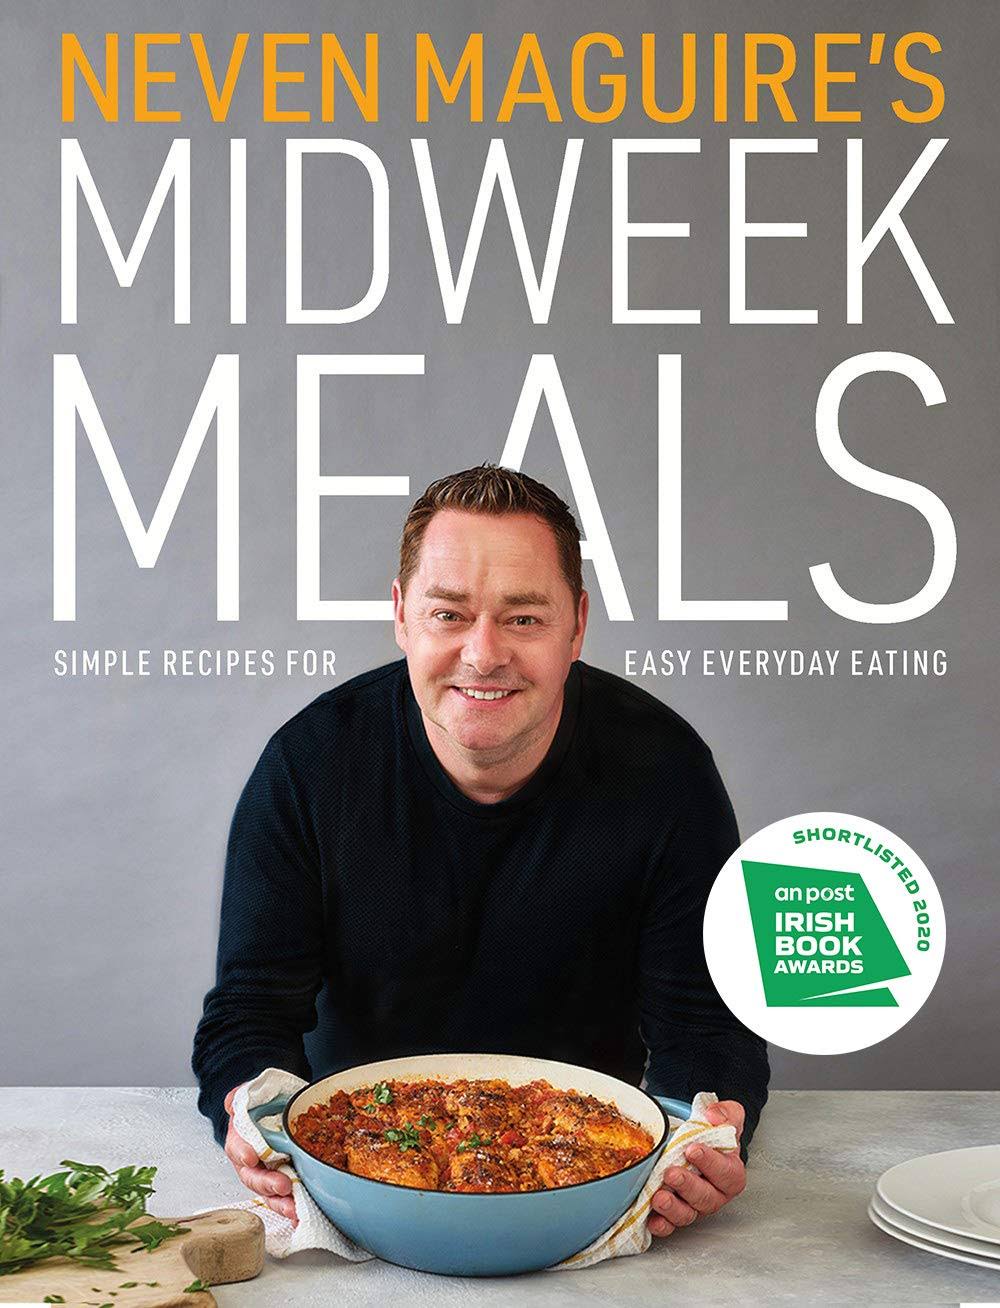 Neven Maguire's Midweek Meals: Simple Recipes for Easy Everyday Eating [Book]